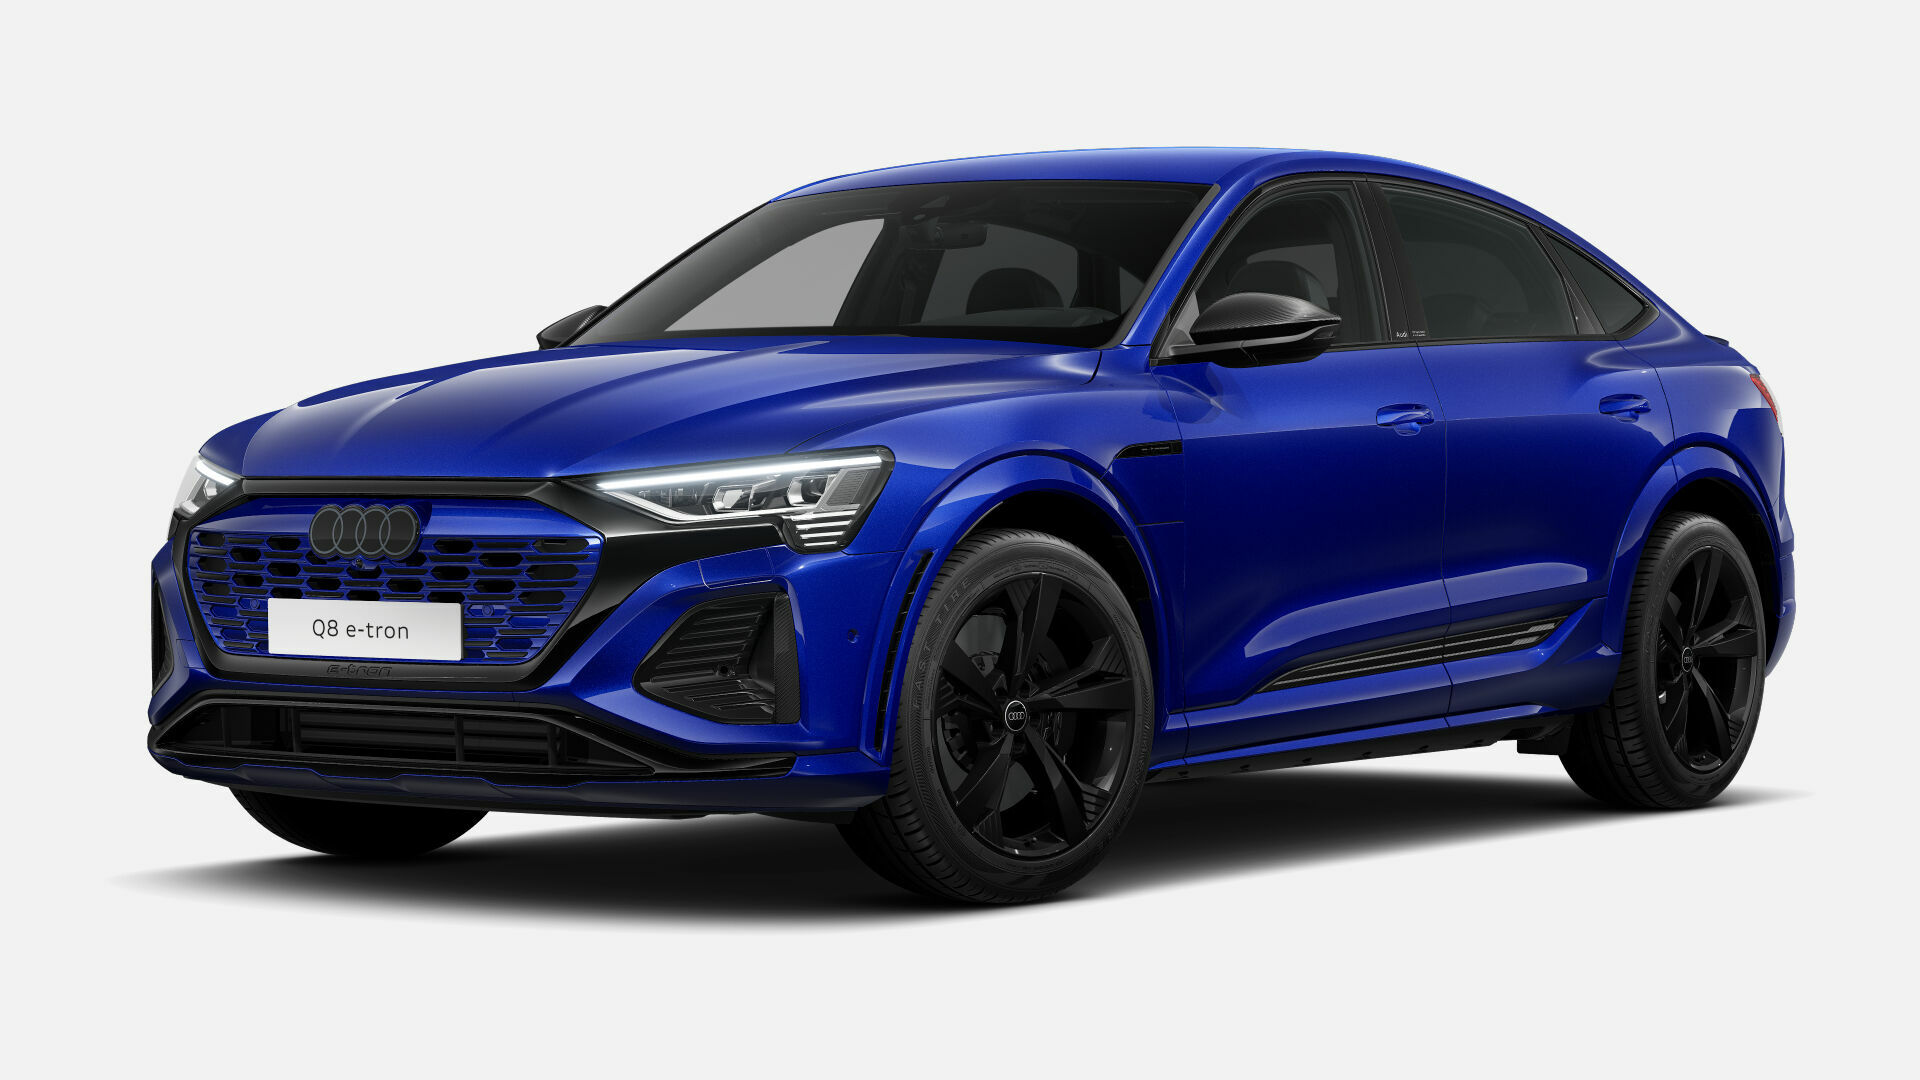 The Audi Q8 e-tron model series now has an even sportier appearance